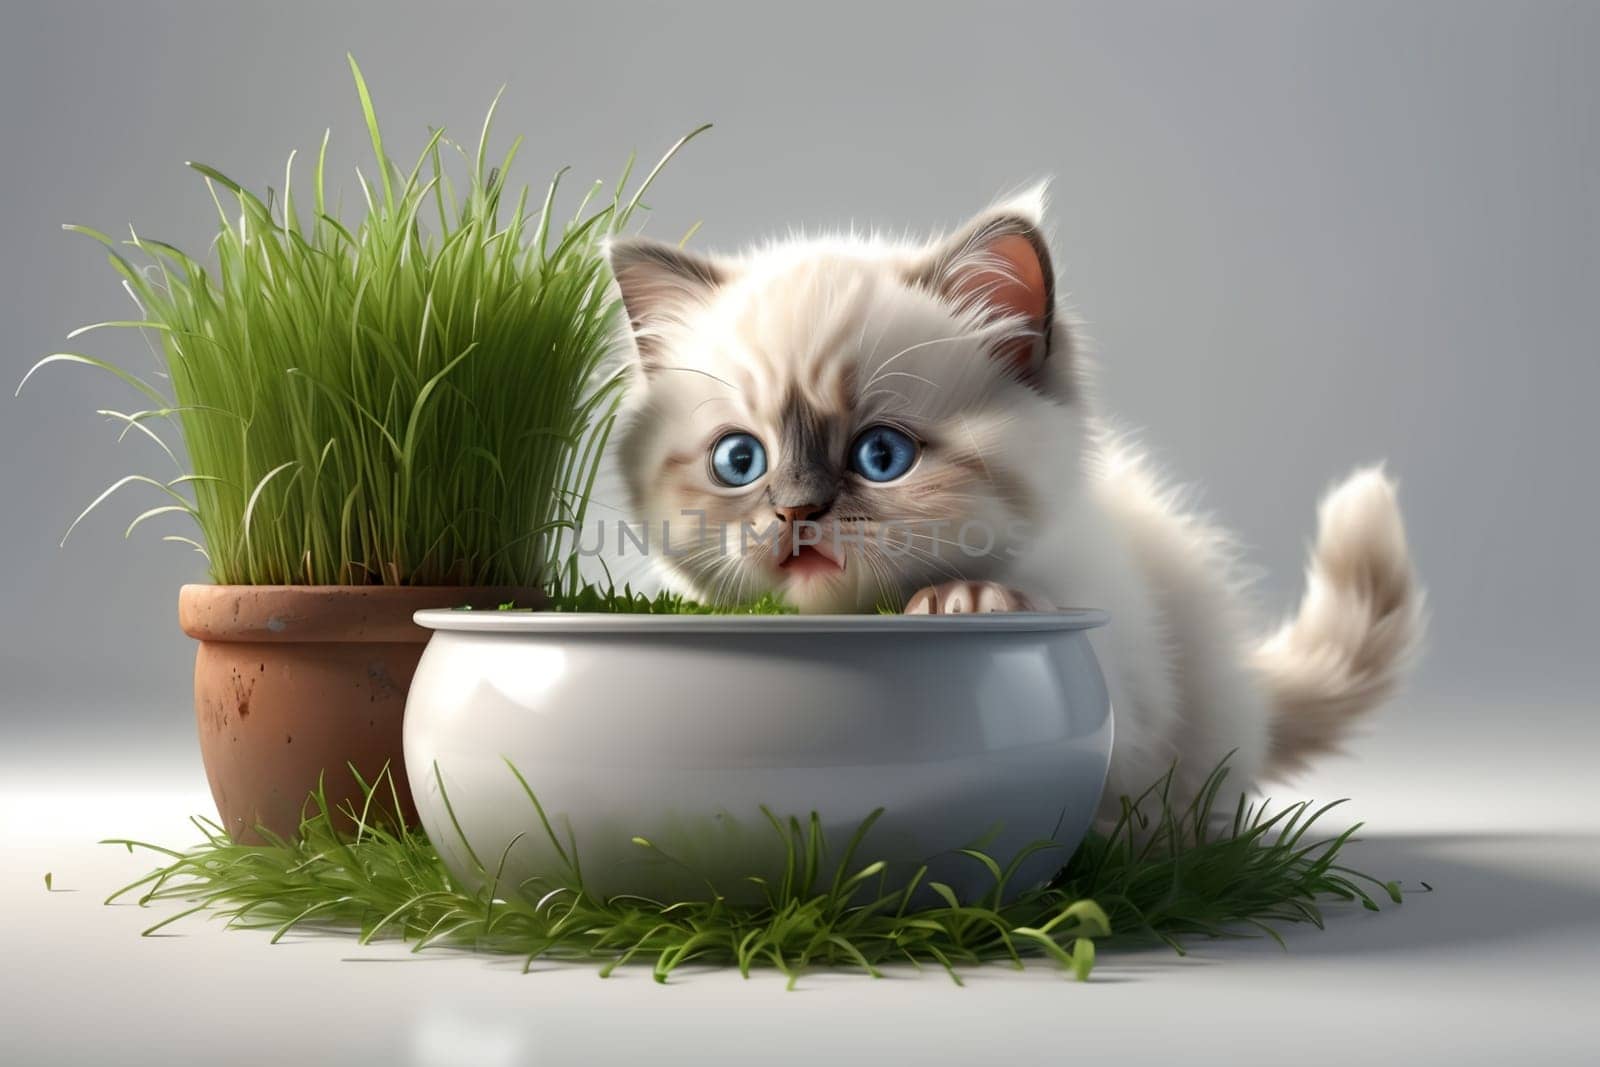 cute Ragdoll kitten eating green juicy grass from a pot, isolated on a white background by Rawlik